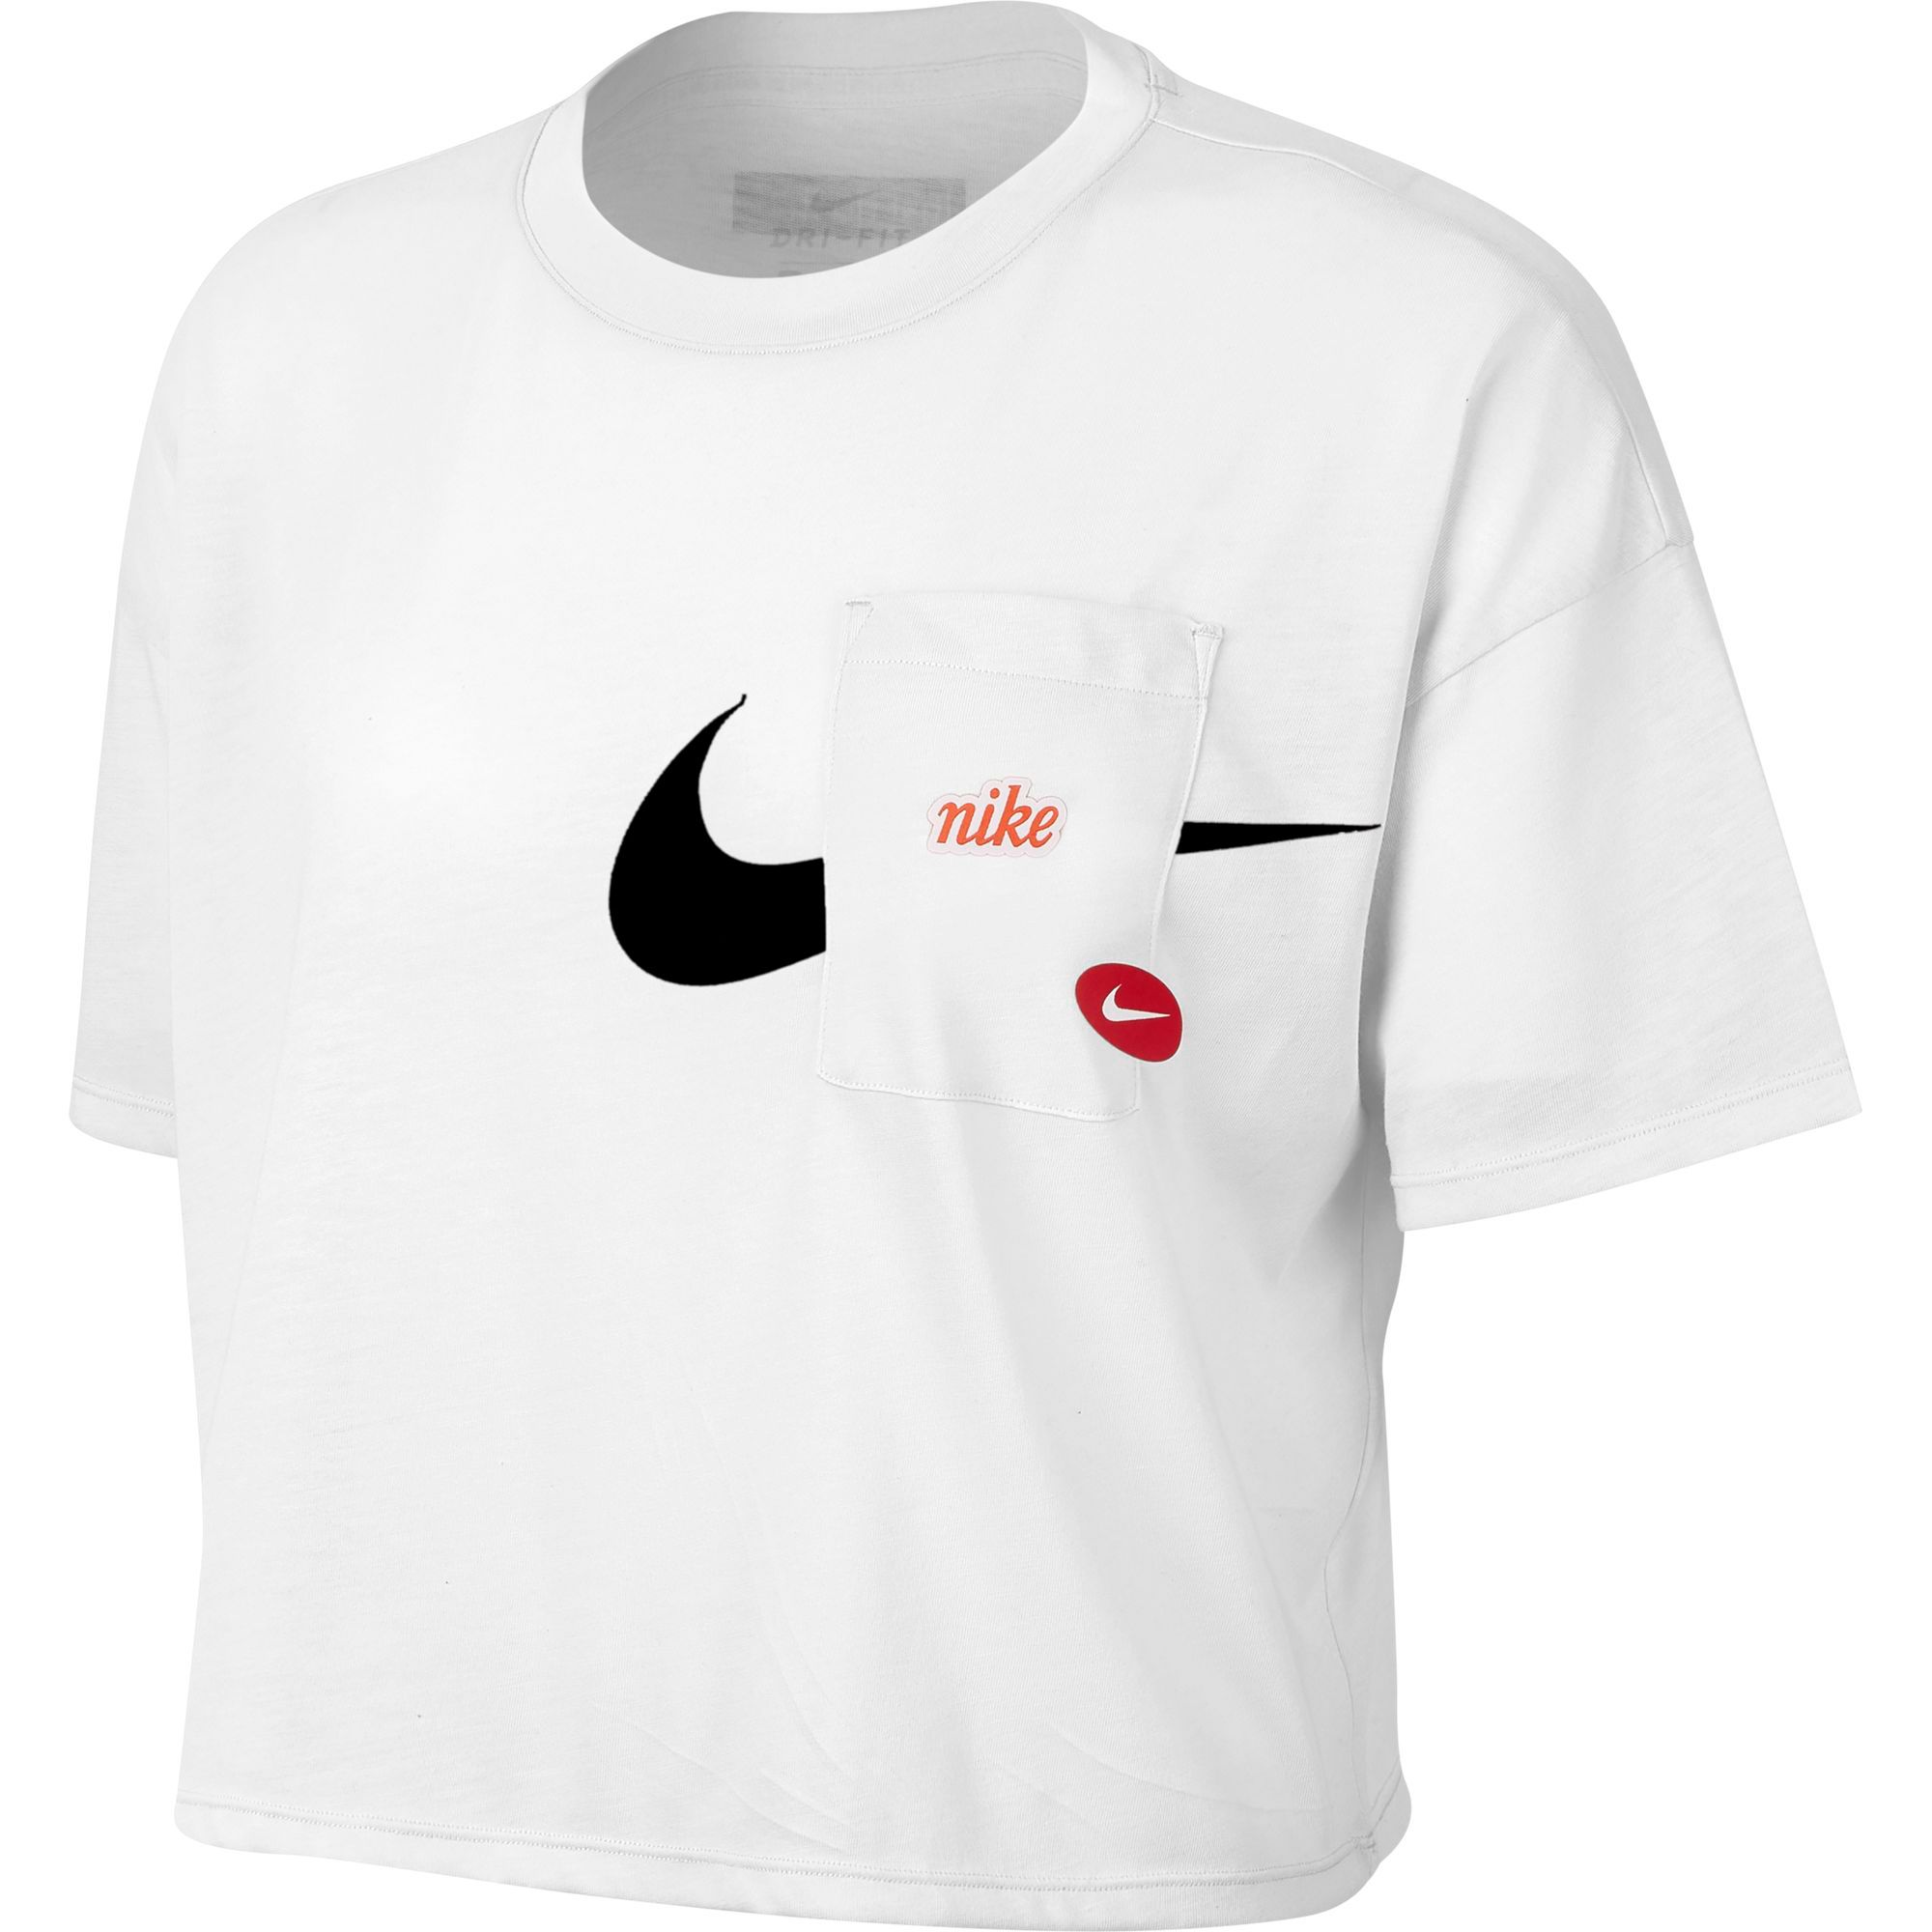 nike just do it top womens